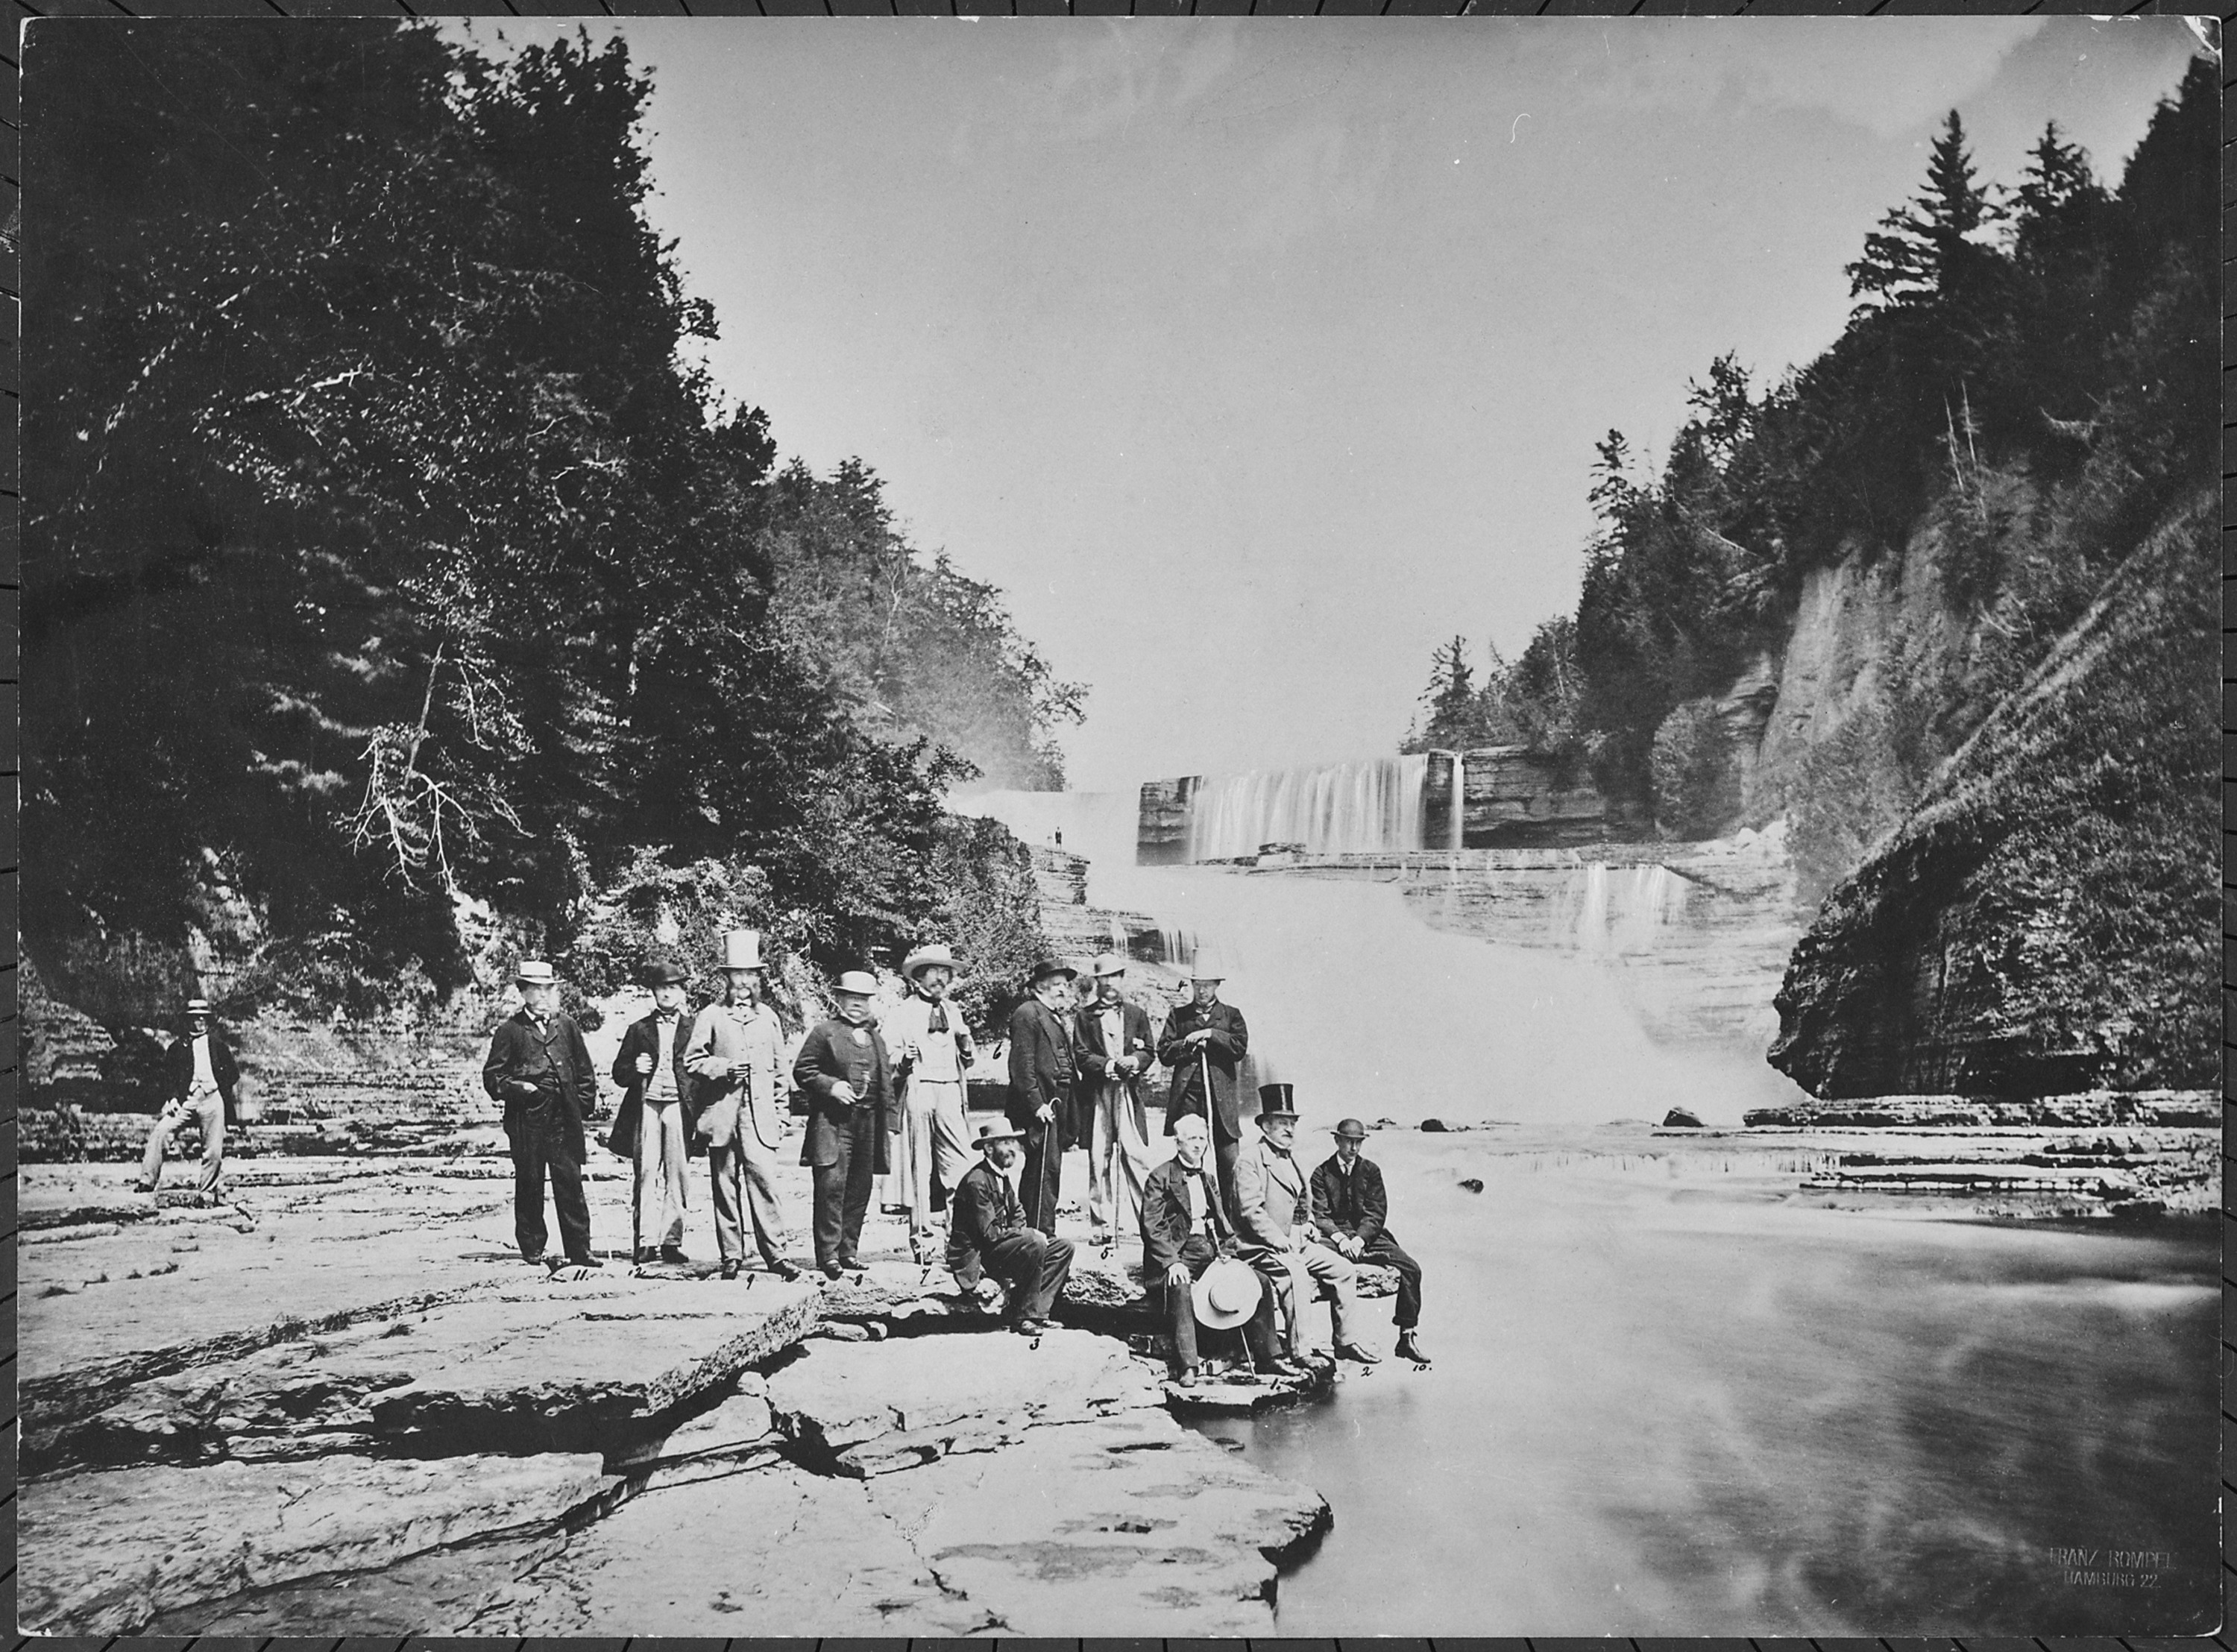 Diplomats at the foot of an unidentified waterfall, New York State, 08-1863 - NARA - 518056